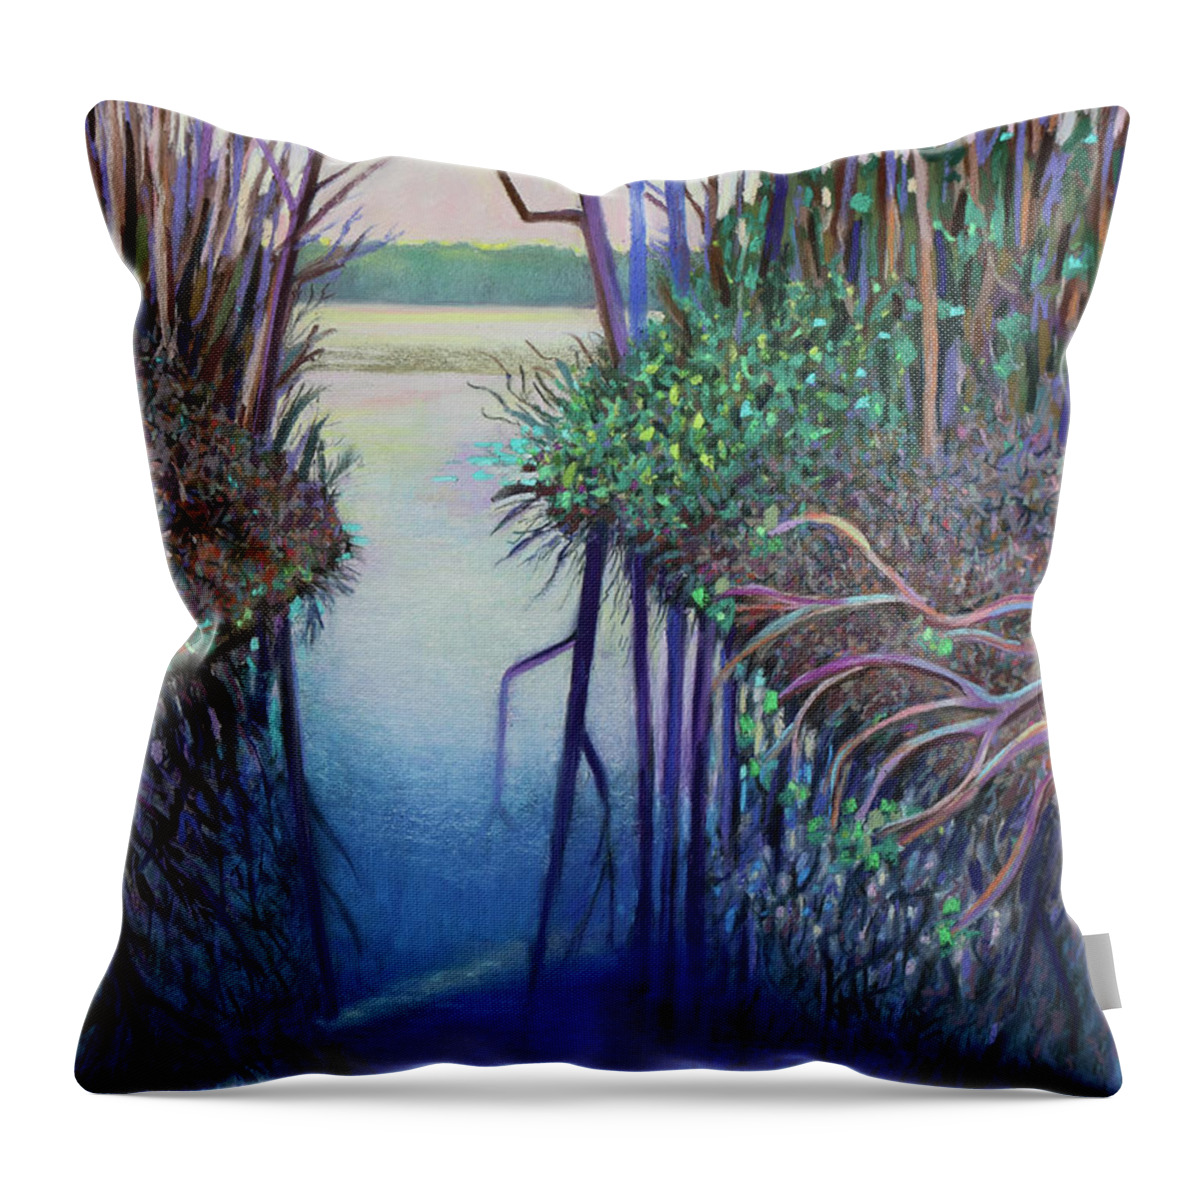  Throw Pillow featuring the painting Springtime Blues by Polly Castor